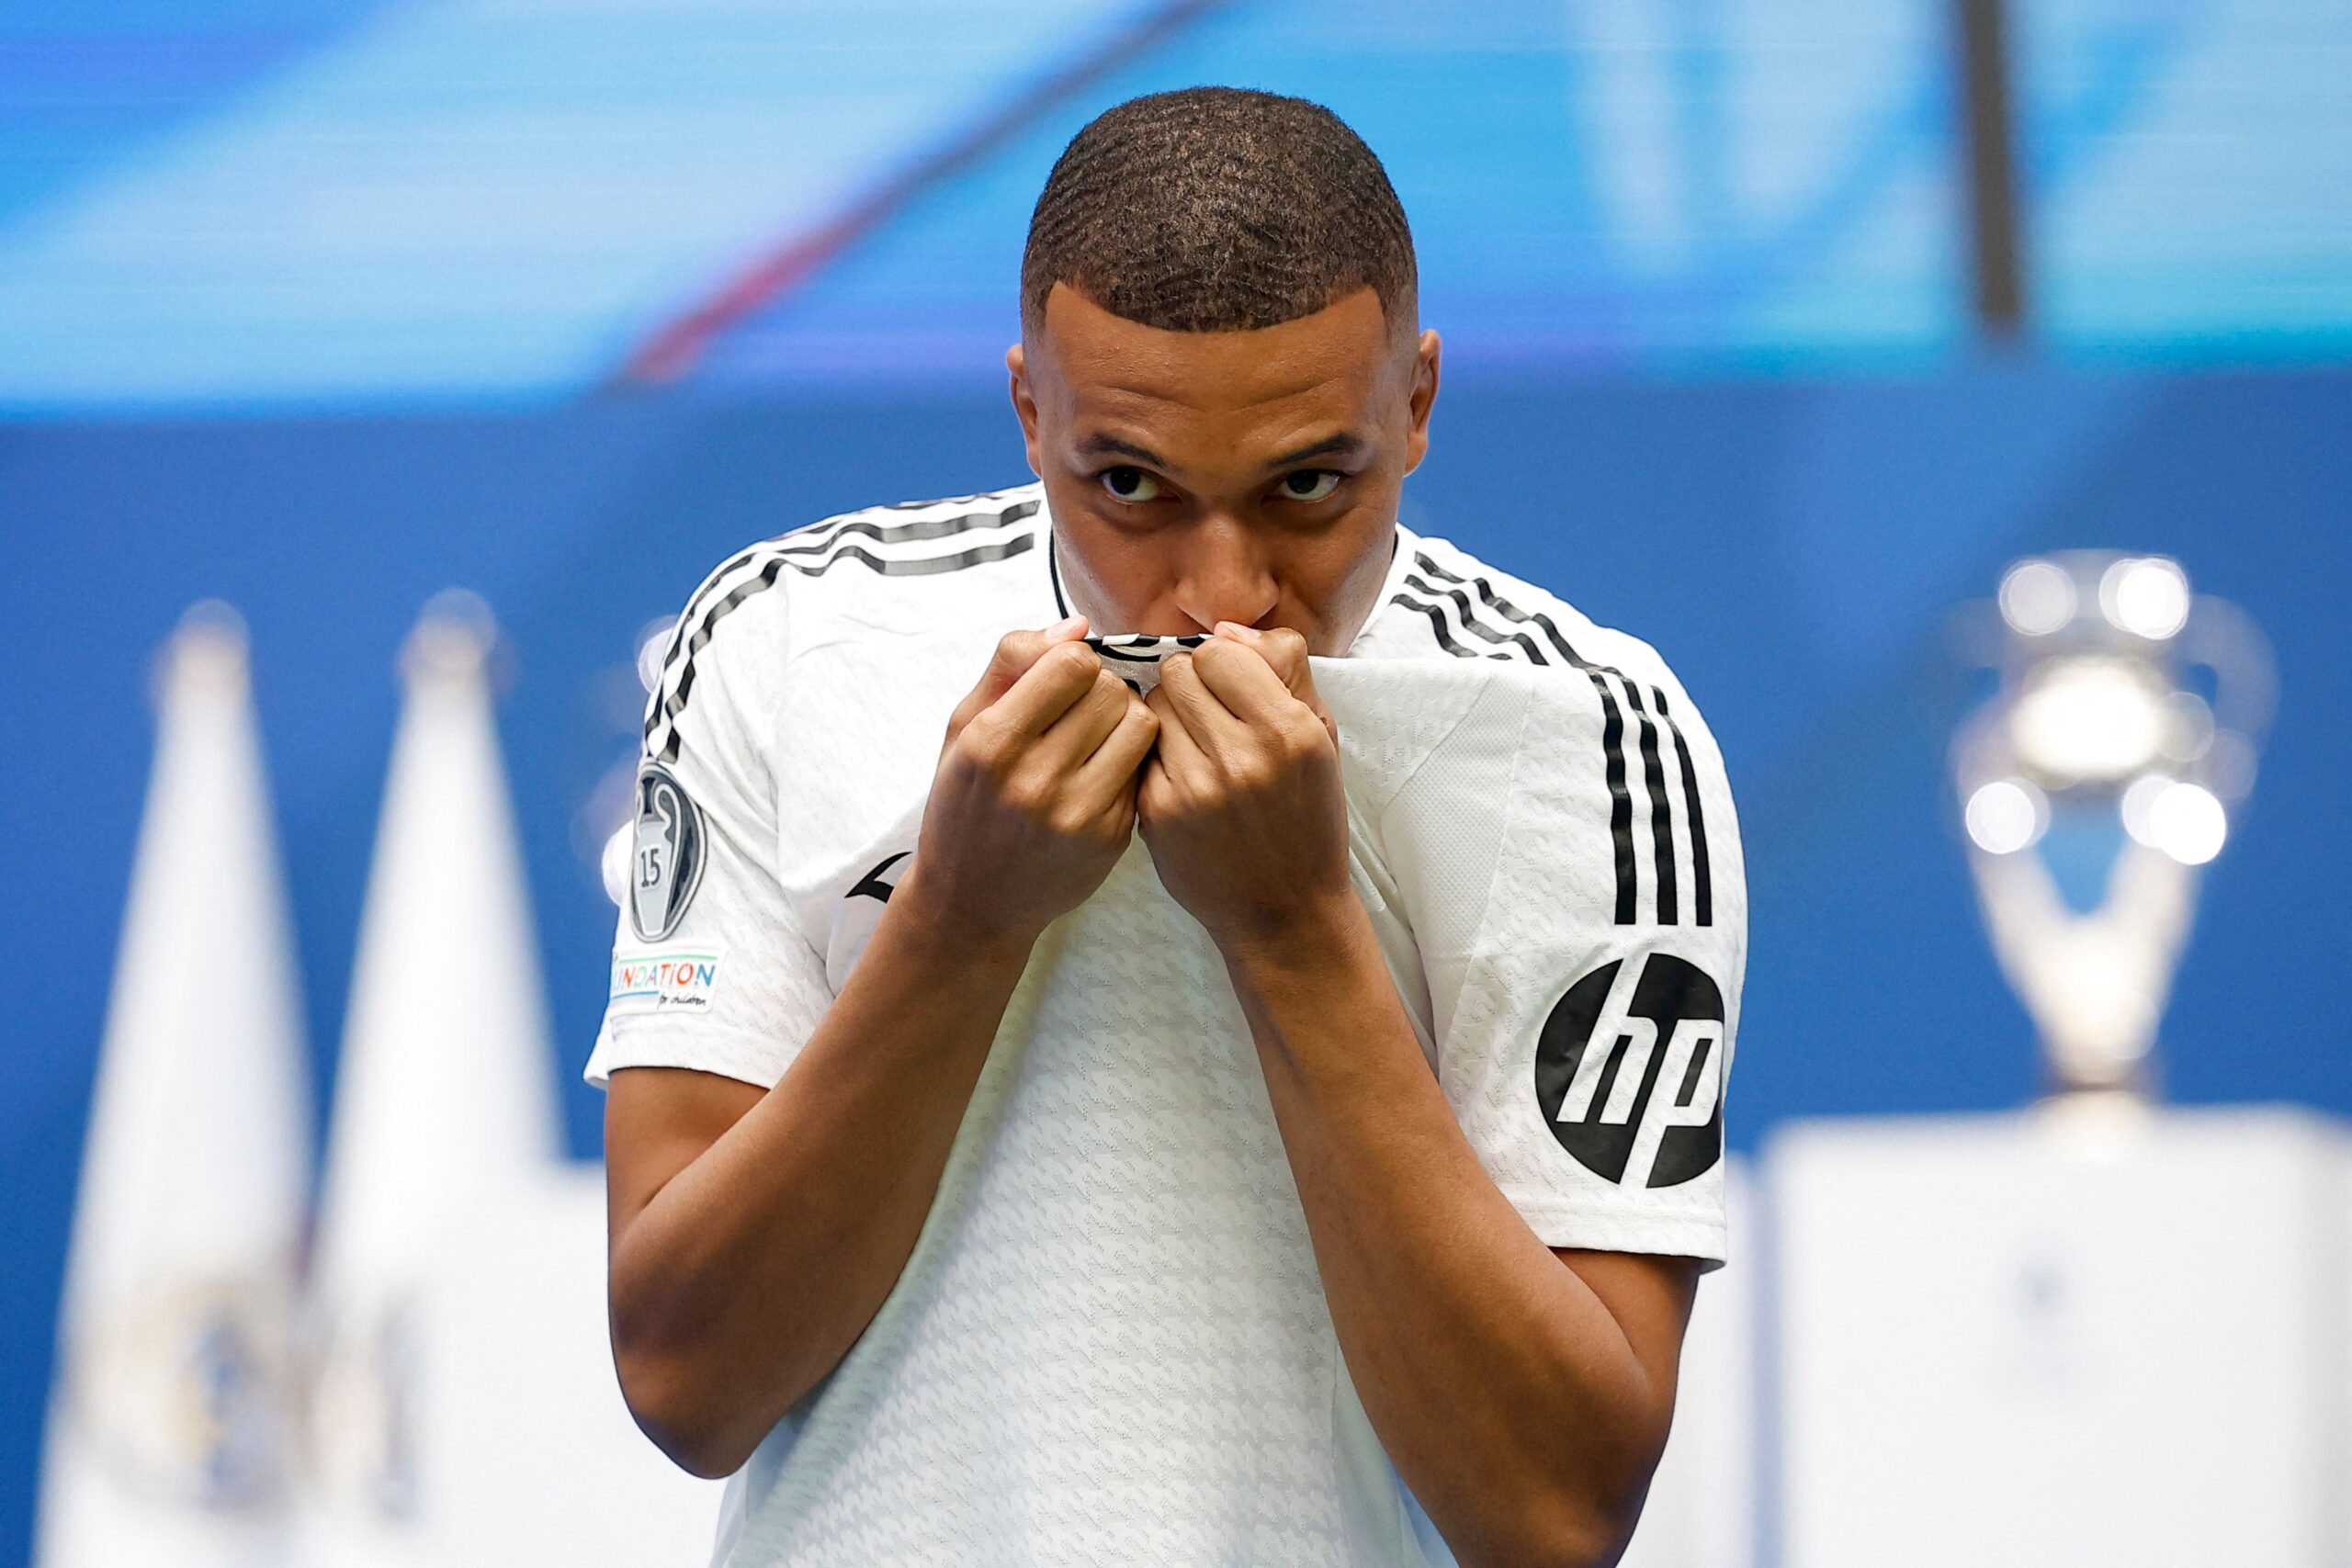 Kylian Mbappe presentation LIVE: Real Madrid make French superstar’s dream come true